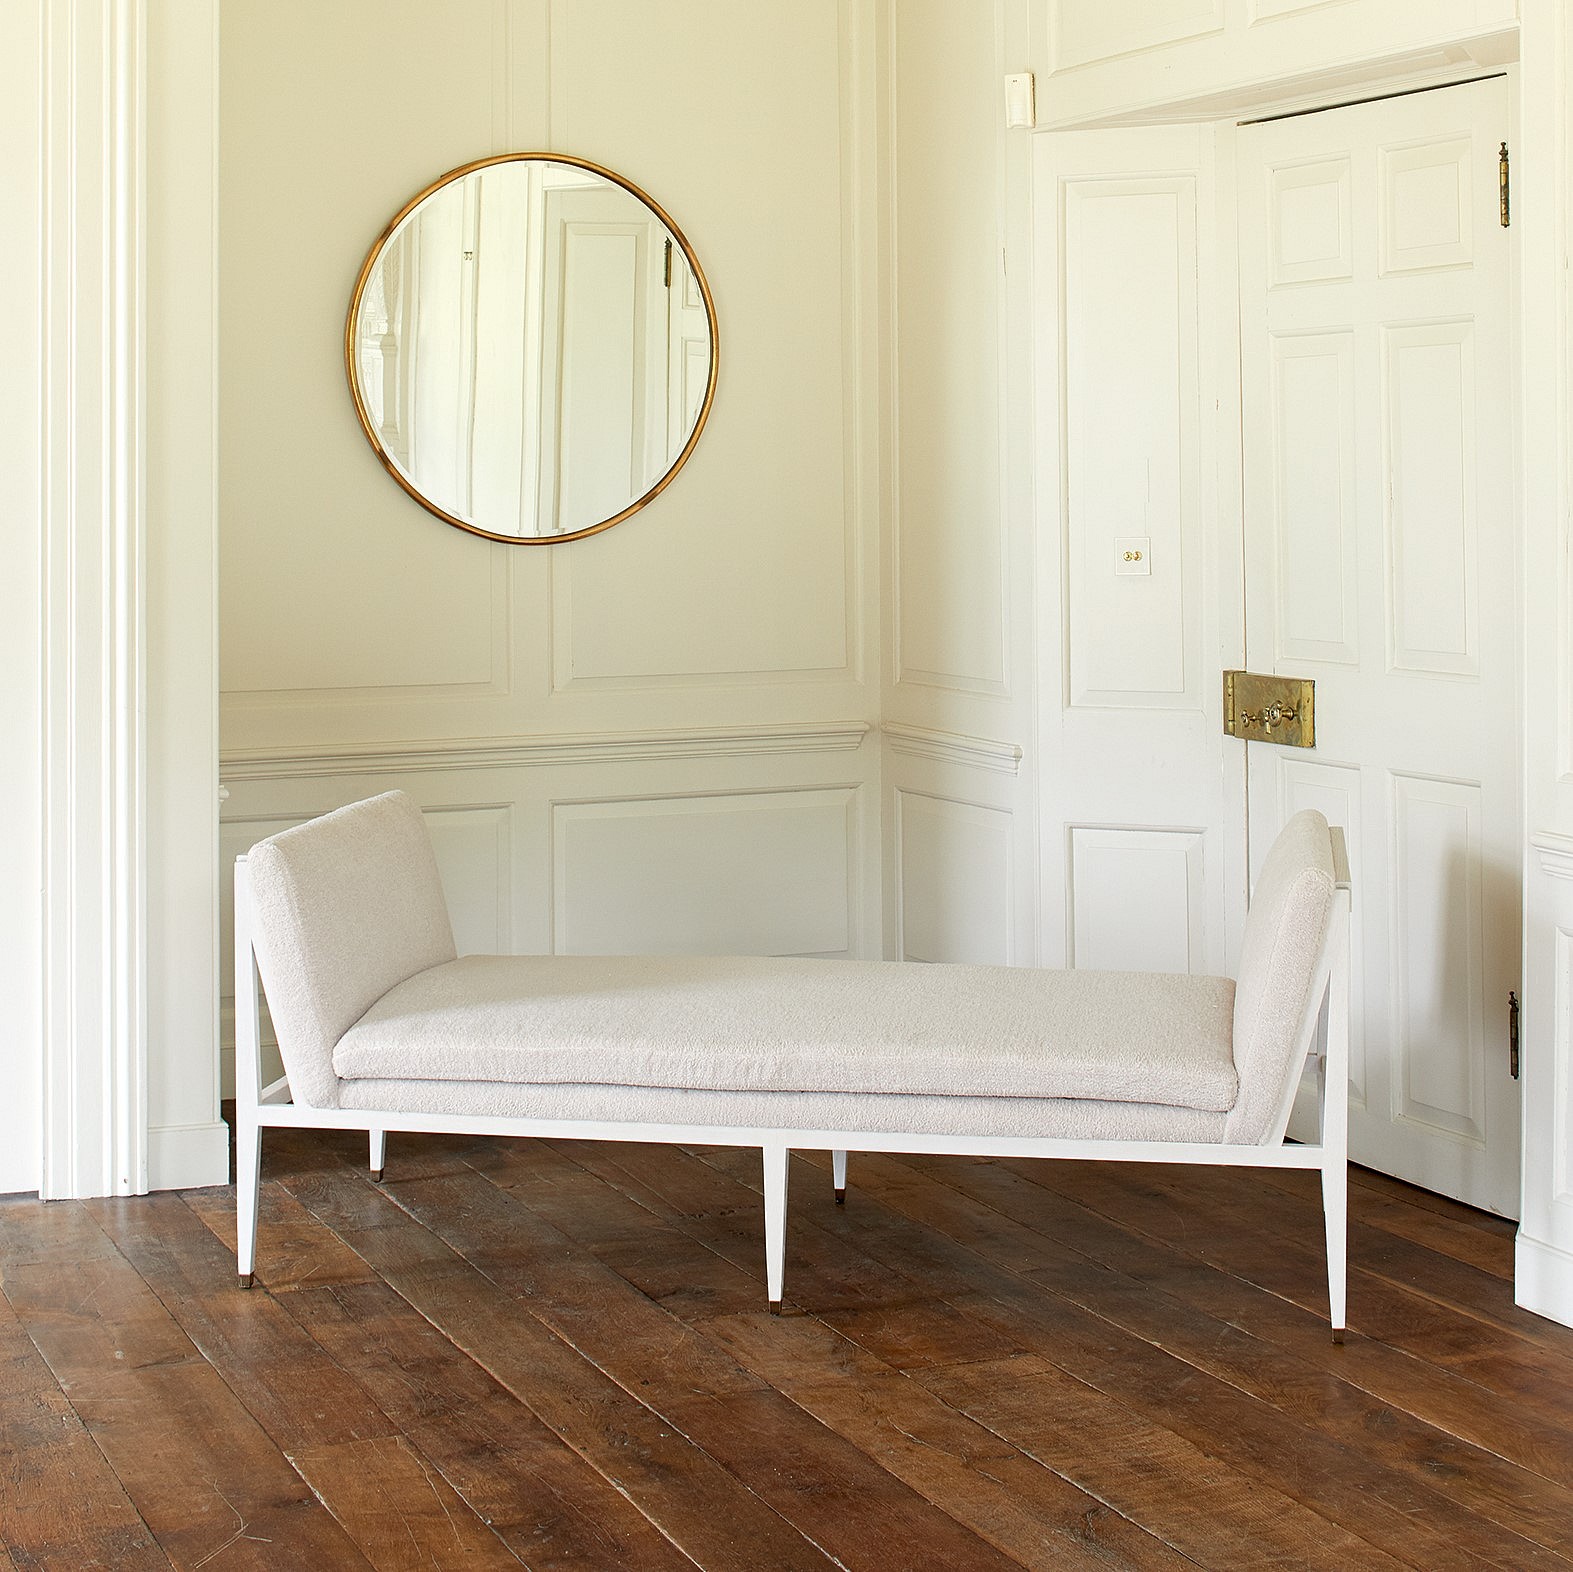 'Marc's' daybed, Julian Chichester